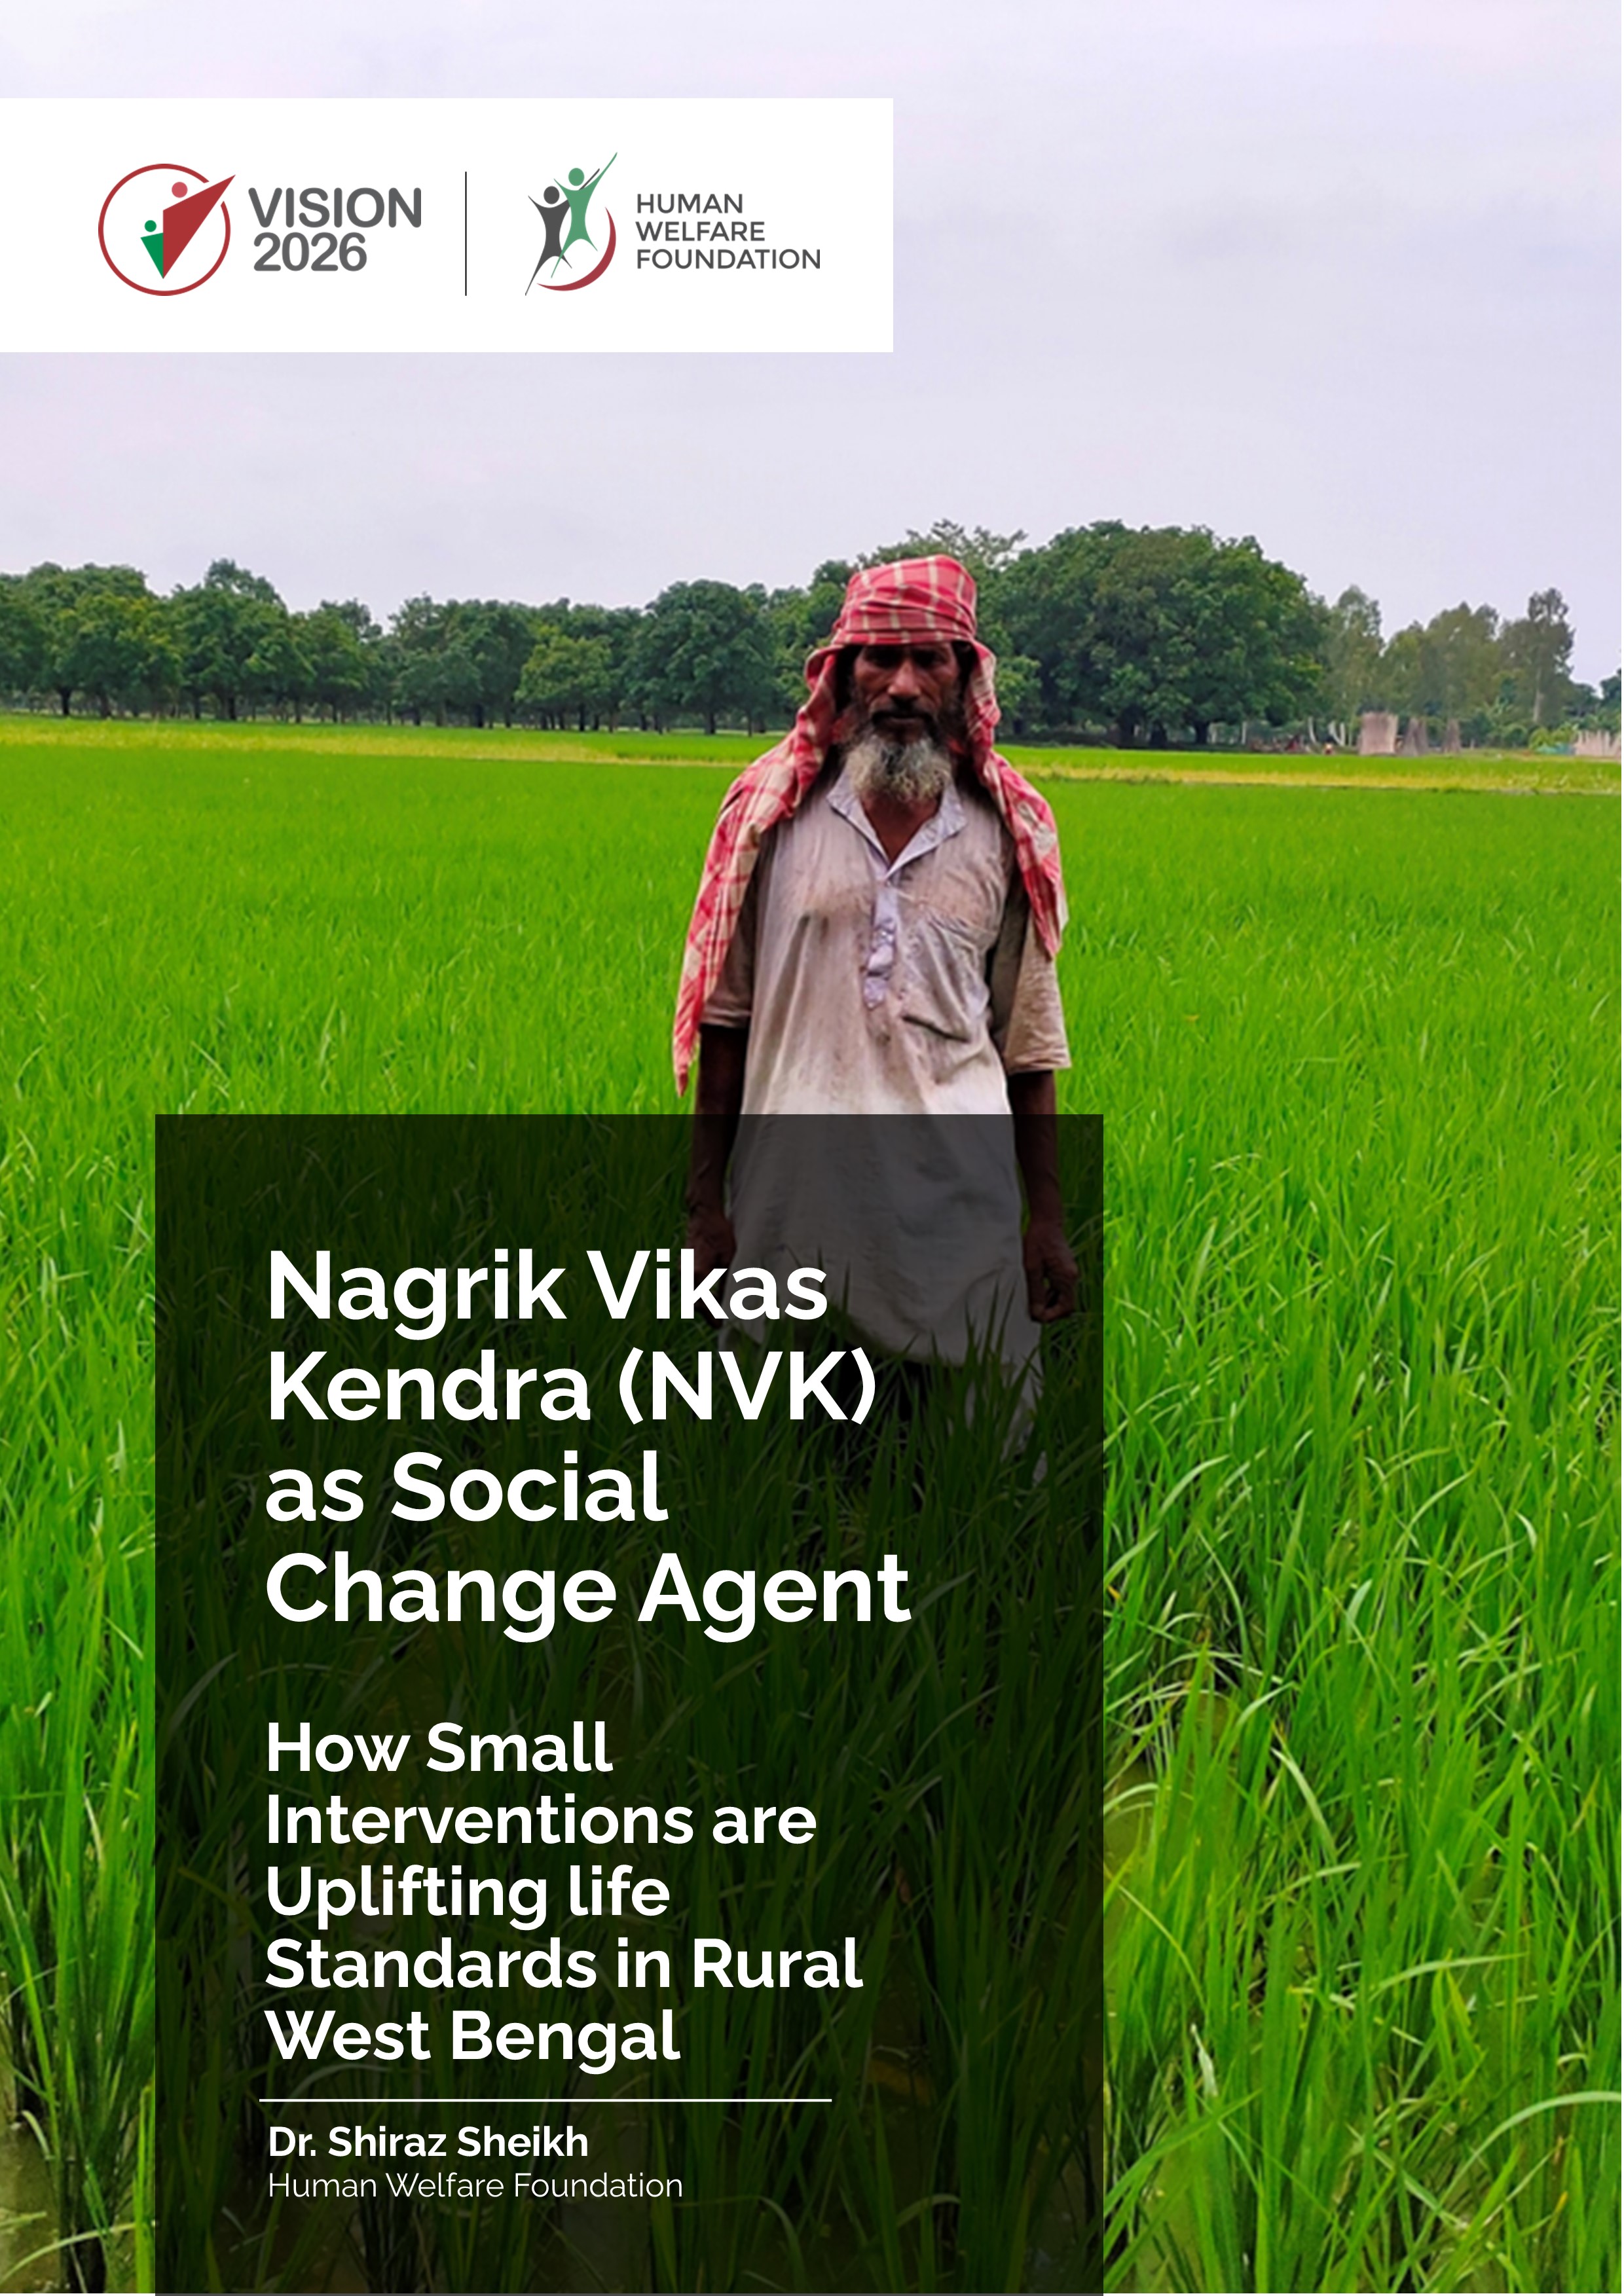 Nagrik Vikas Kendra (NVK) - How Small Interventions Are Uplifting life Standards in Rural West Bengal